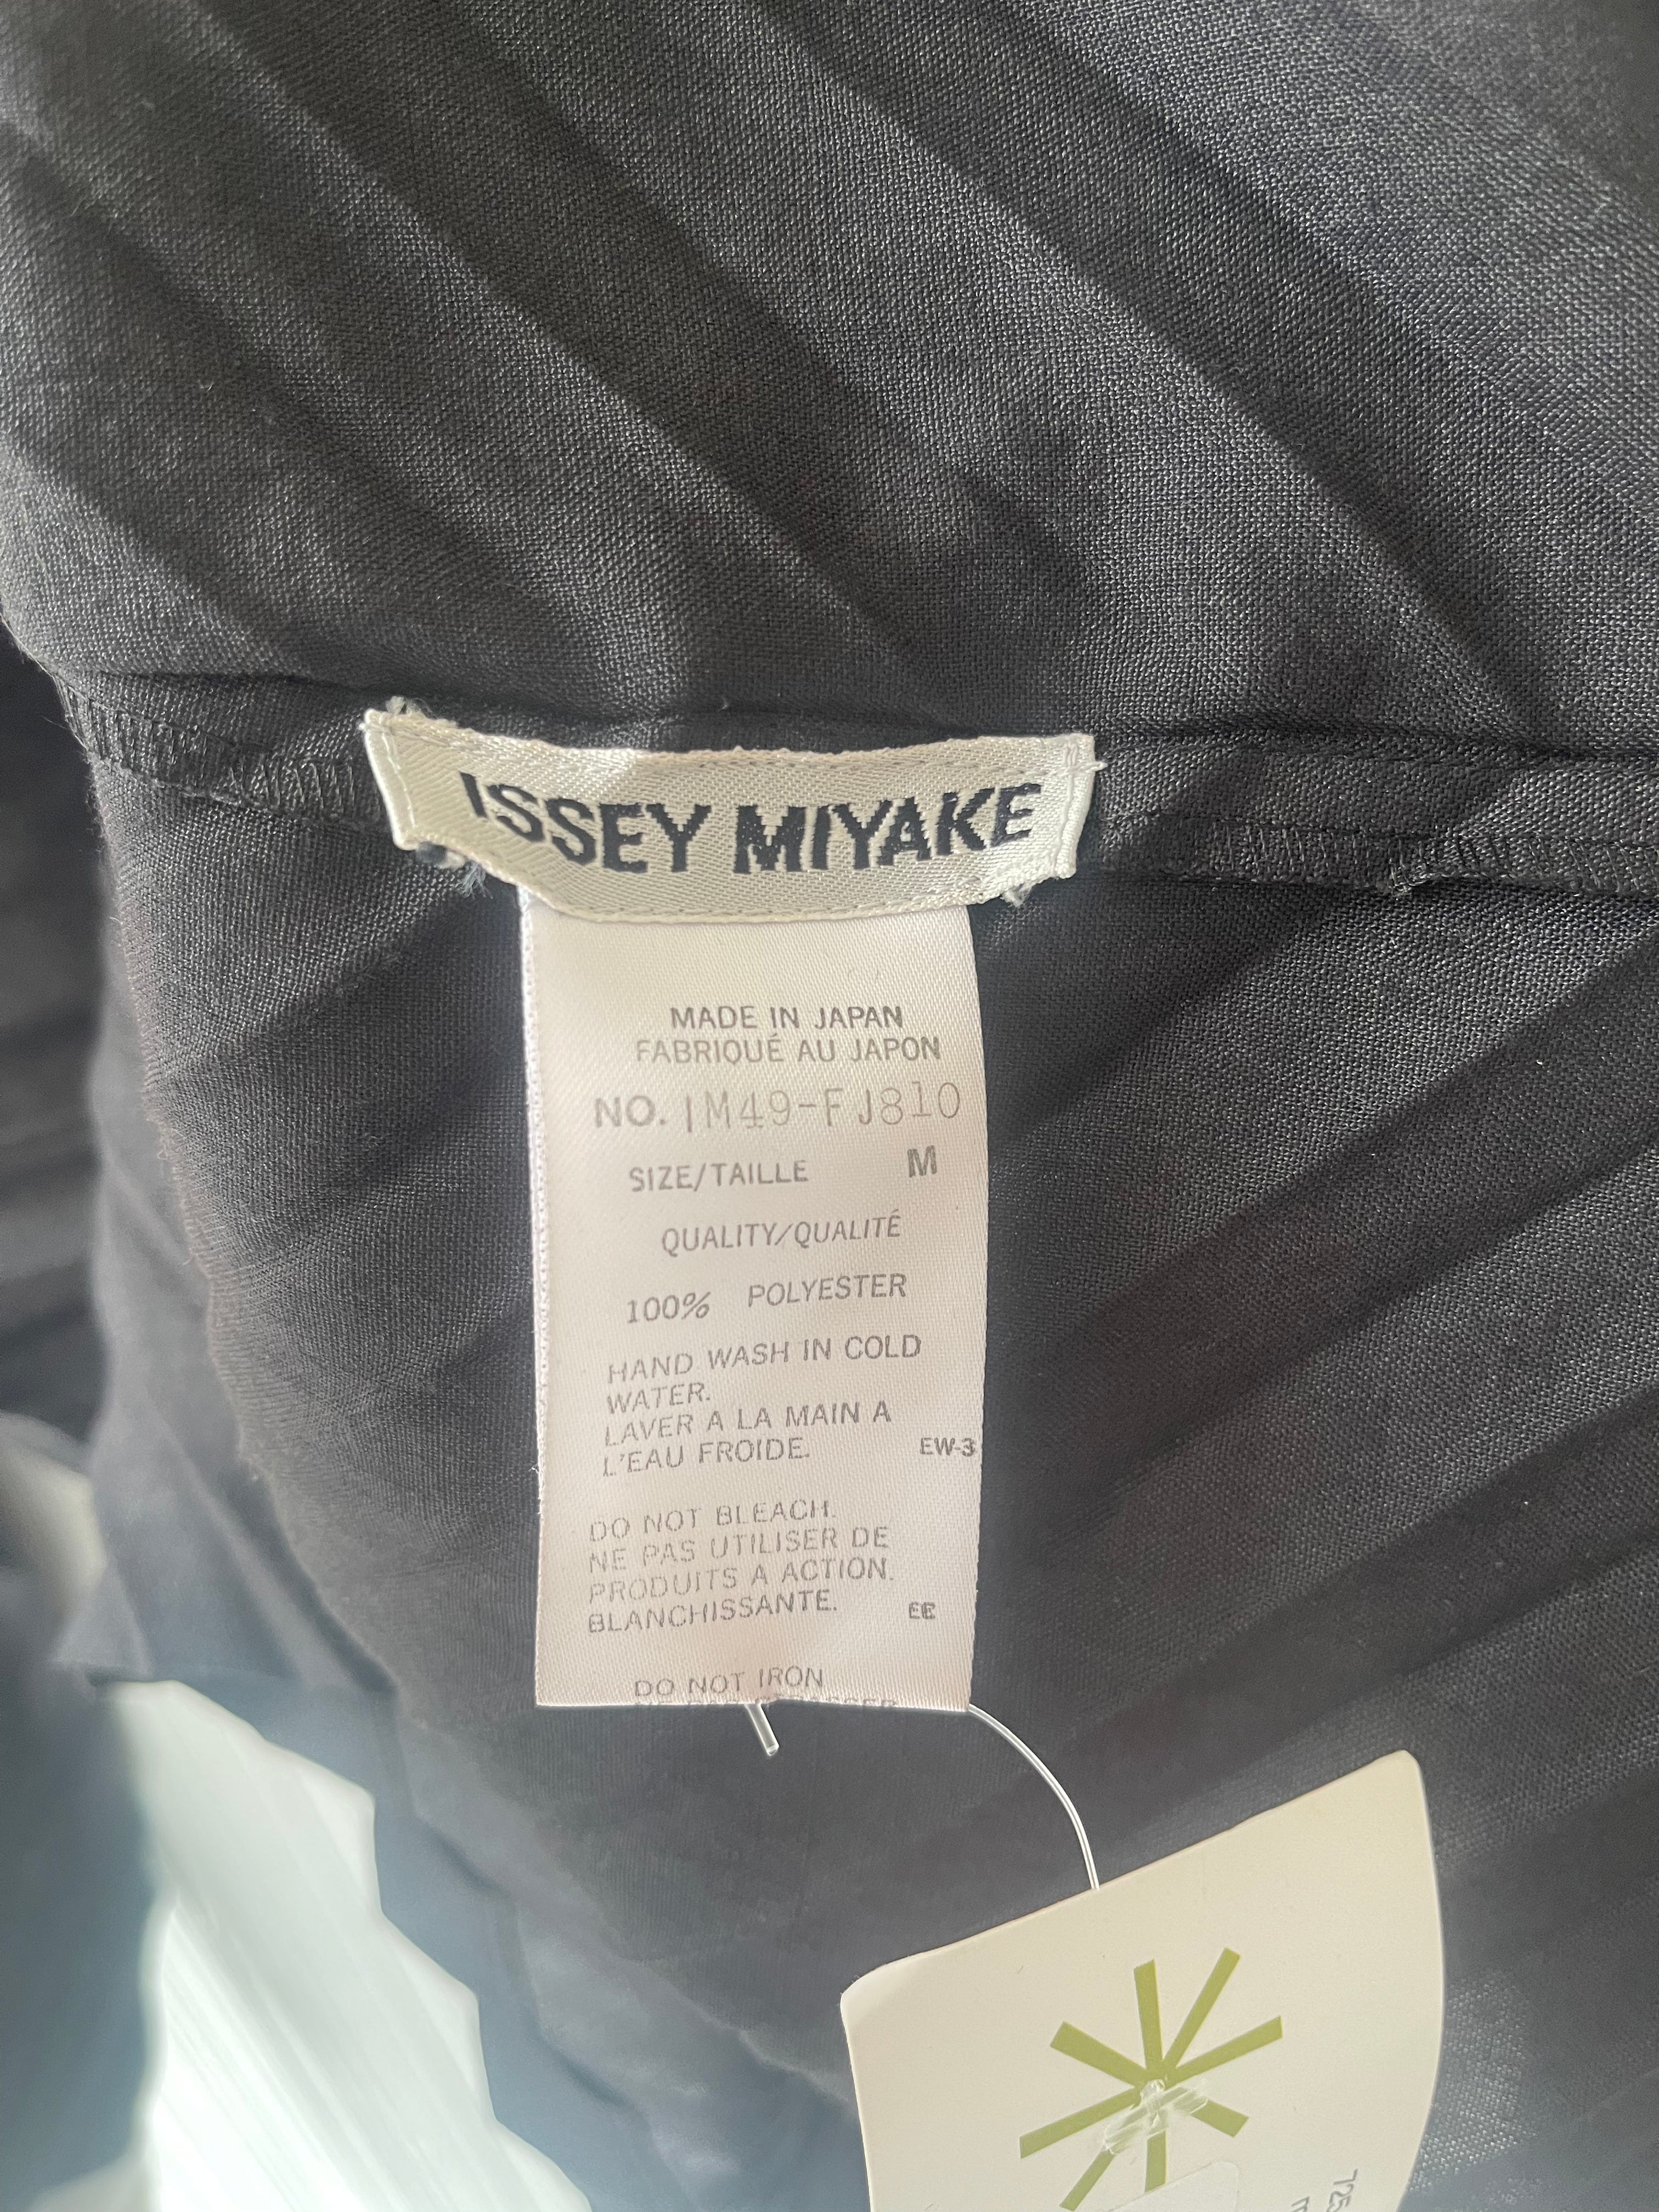 Issey Miyake color block button up top